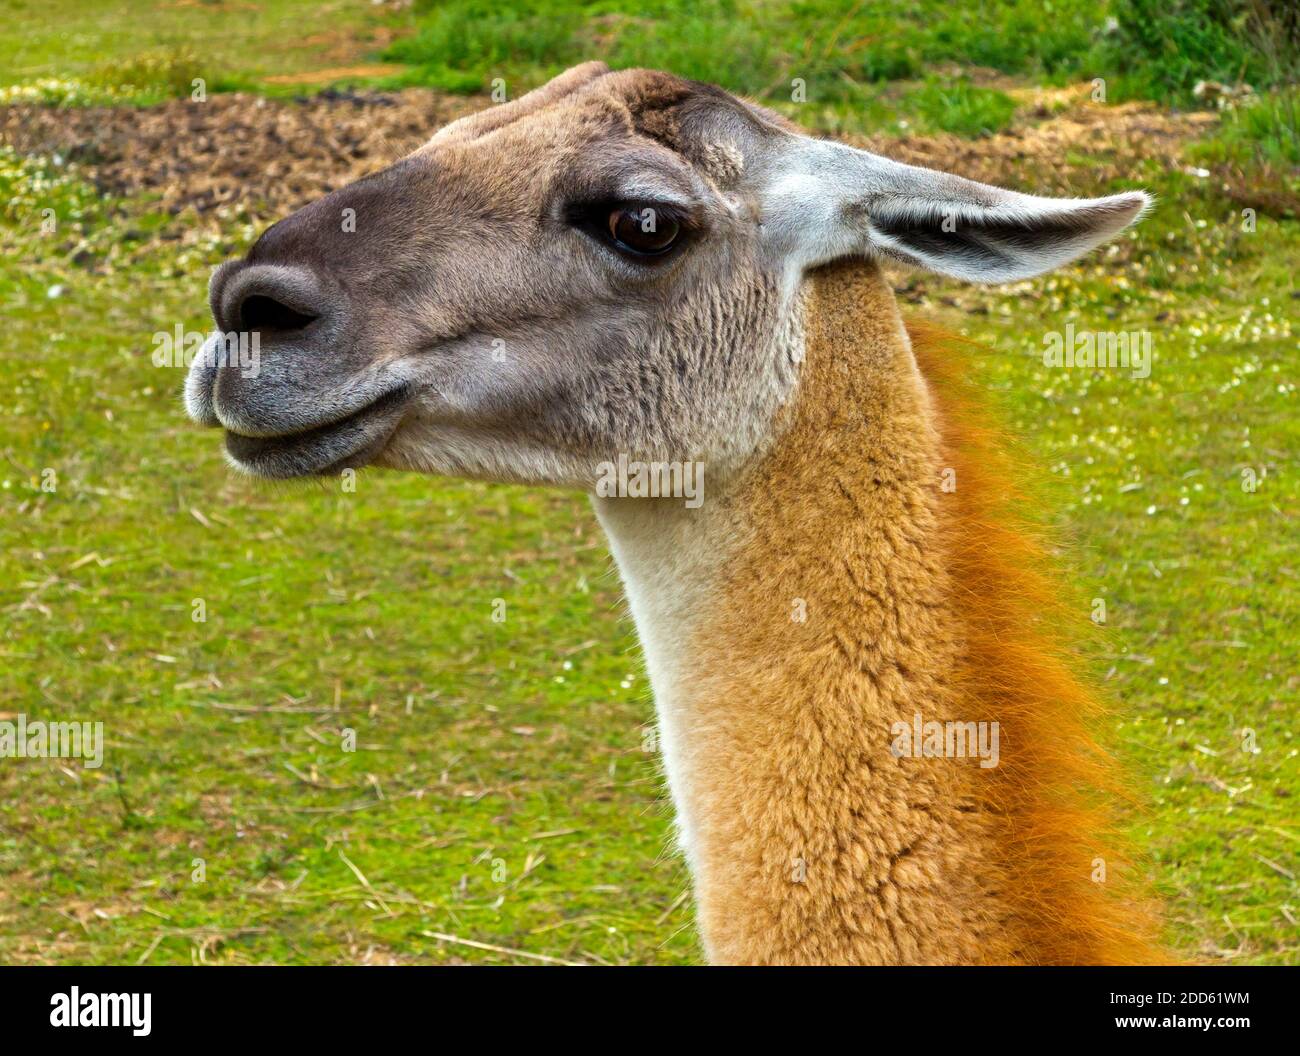 Close up of a Llama (Lama glama)  a domesticated South American camelid, widely used as a meat and pack animal by Andean cultures. Stock Photo